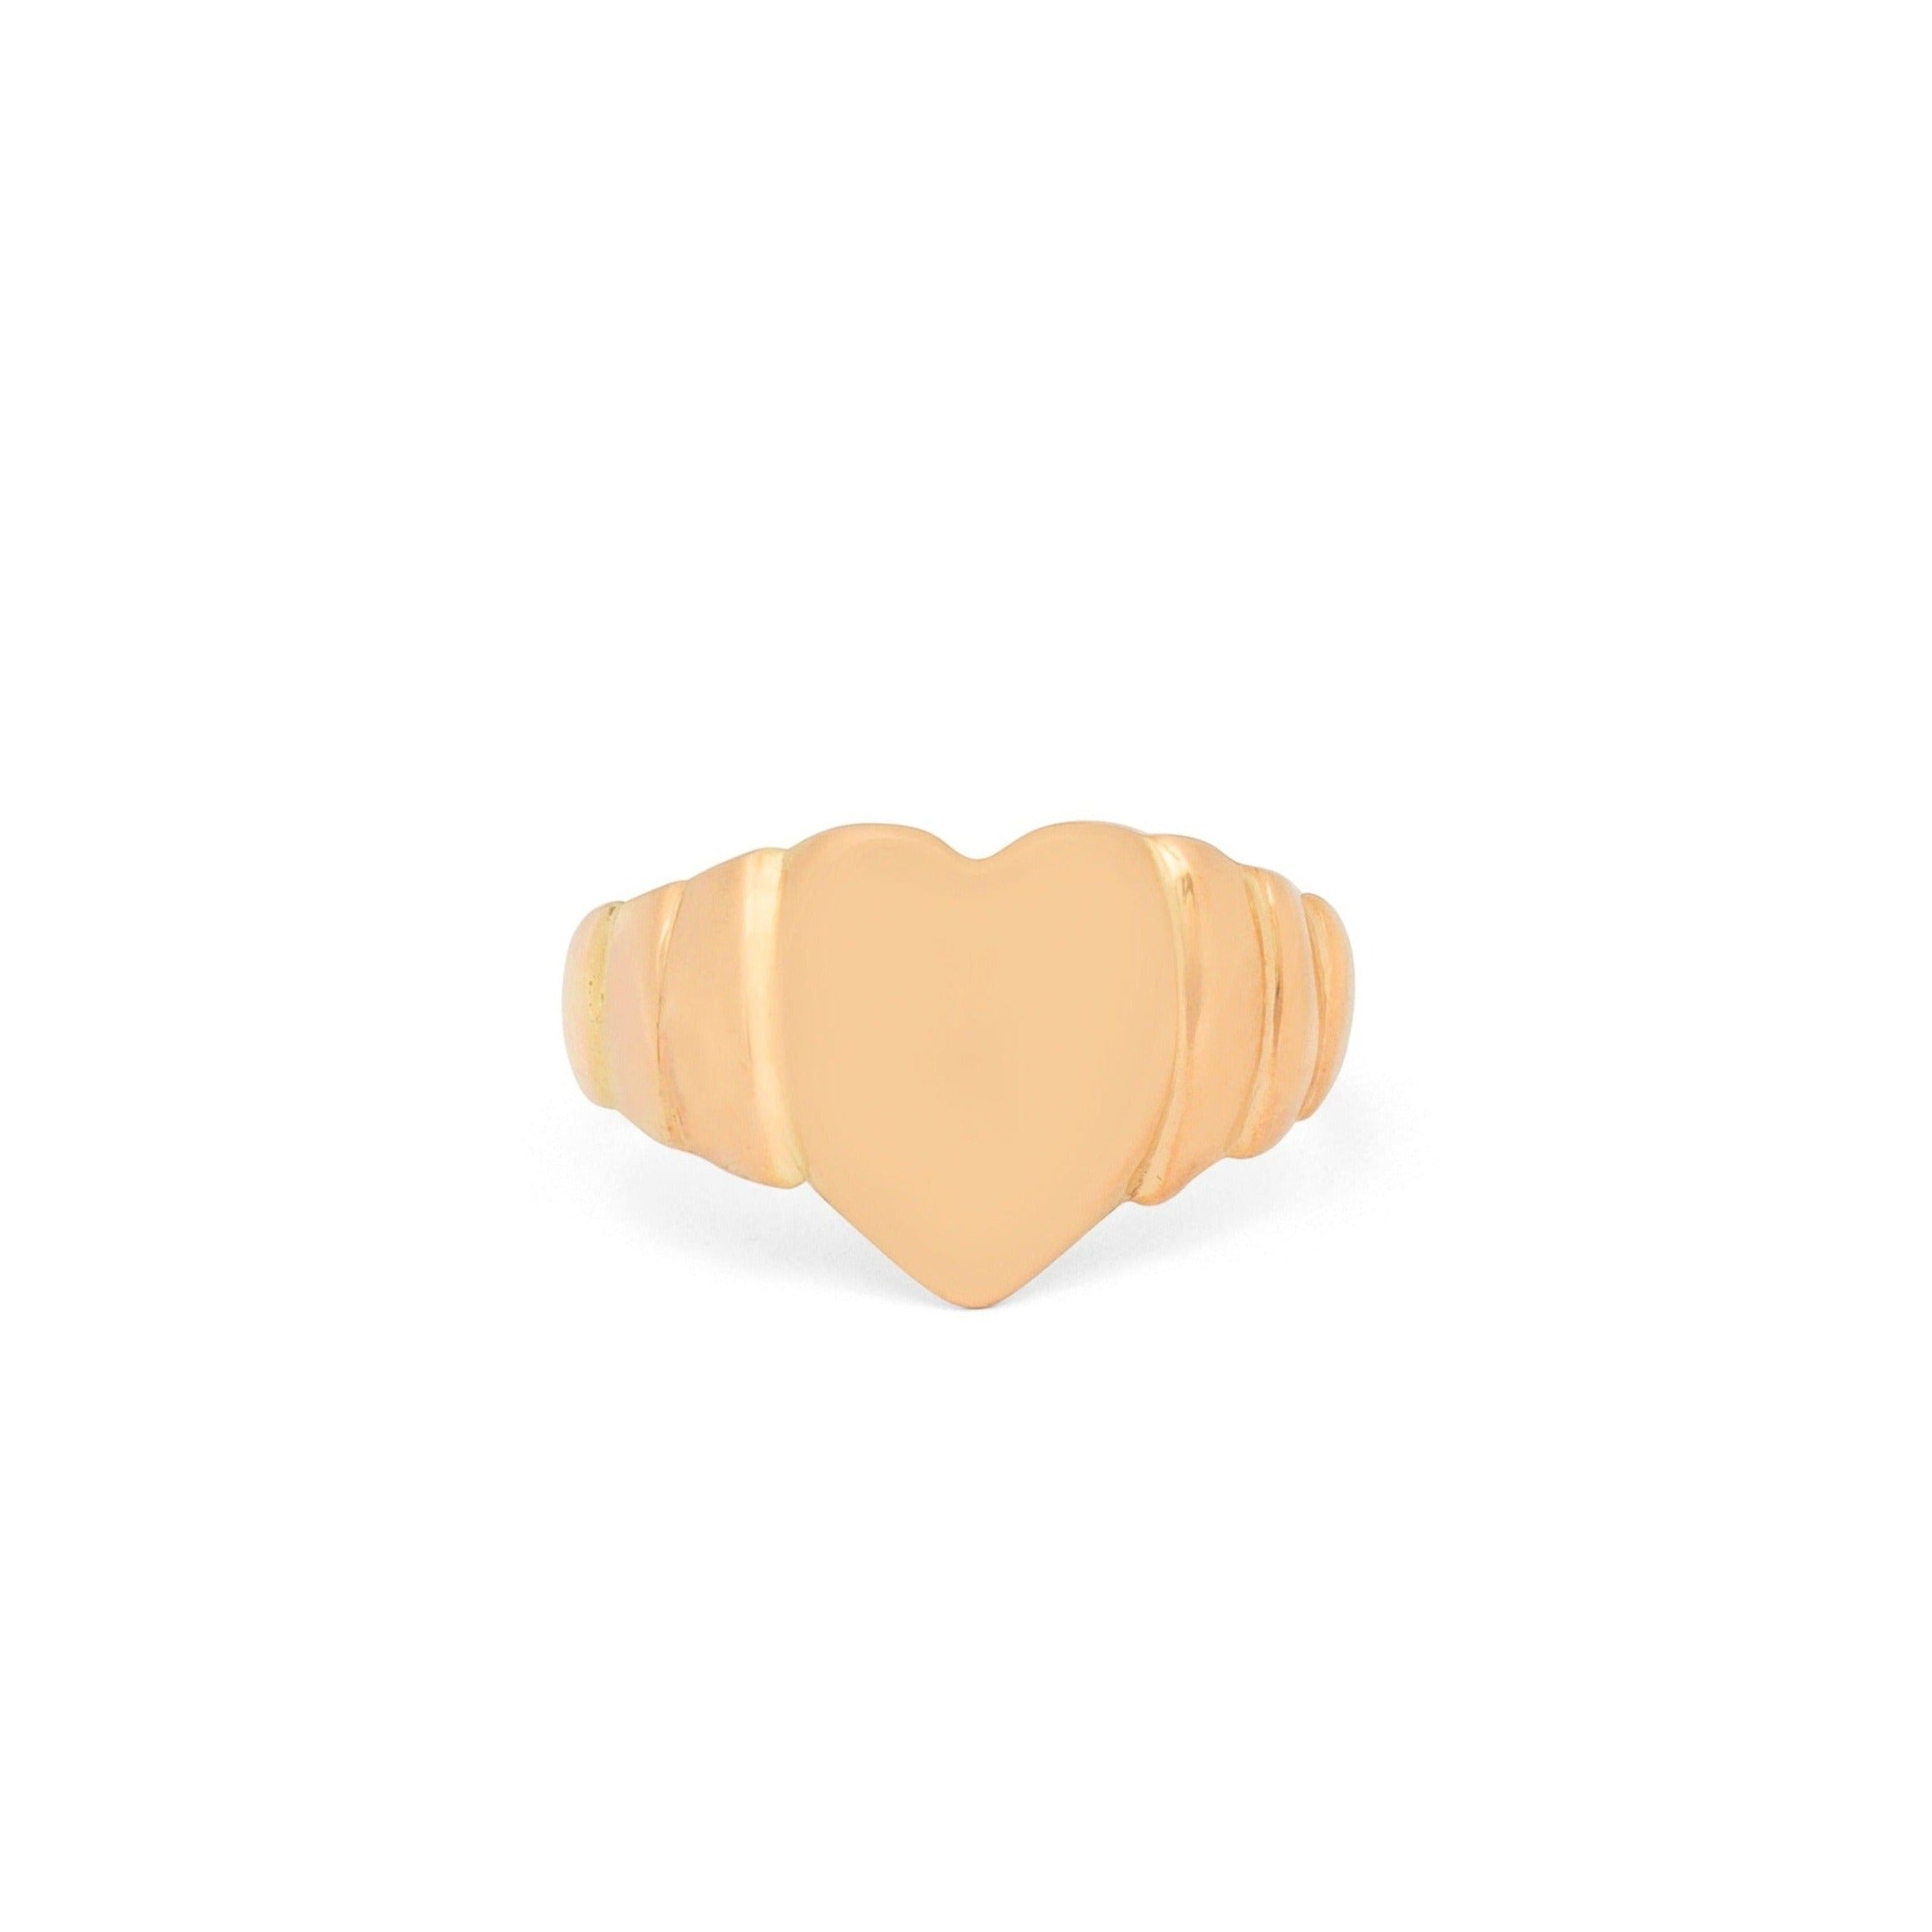 Victorian 14k Gold Heart Shaped Signet Ring